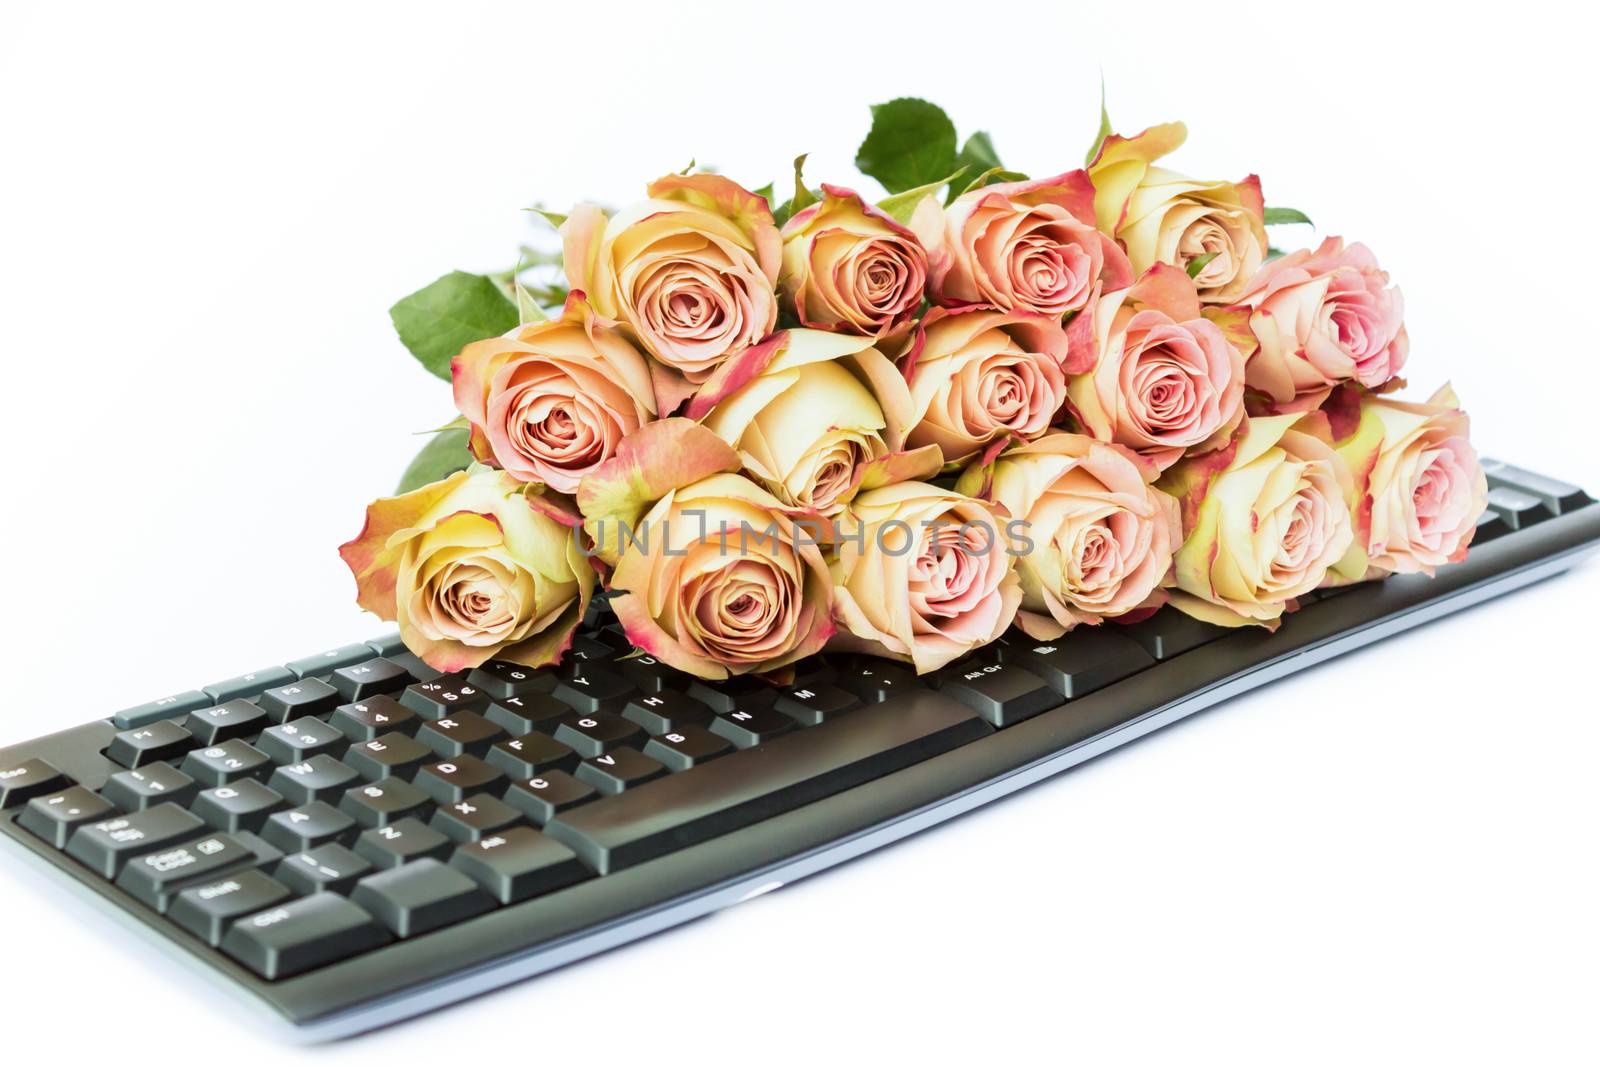 Bouquet of pink roses on keyboard by BenSchonewille